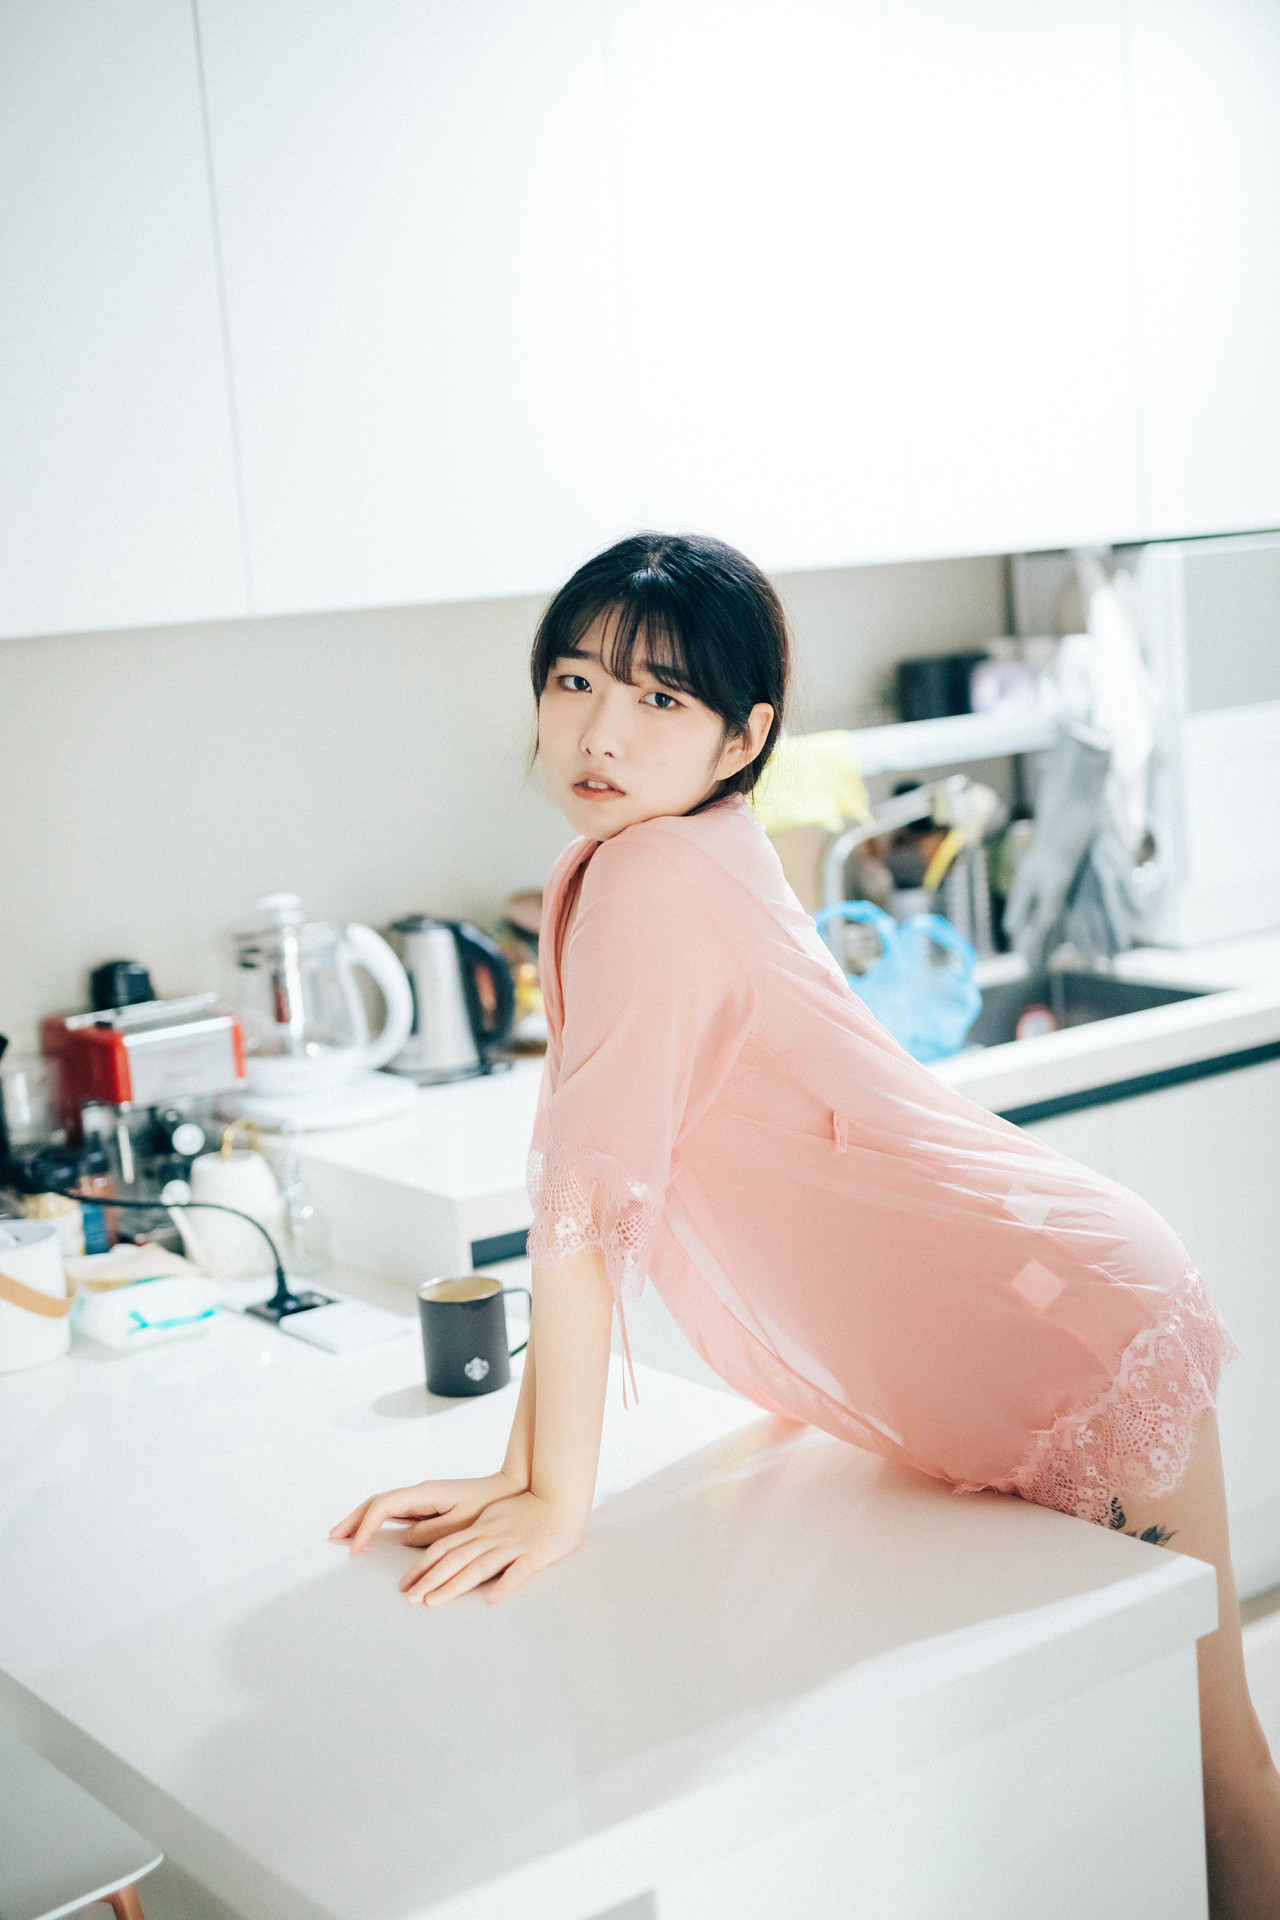 Sonson 손손, [Loozy] Date at home (+S Ver) Set.02(41)